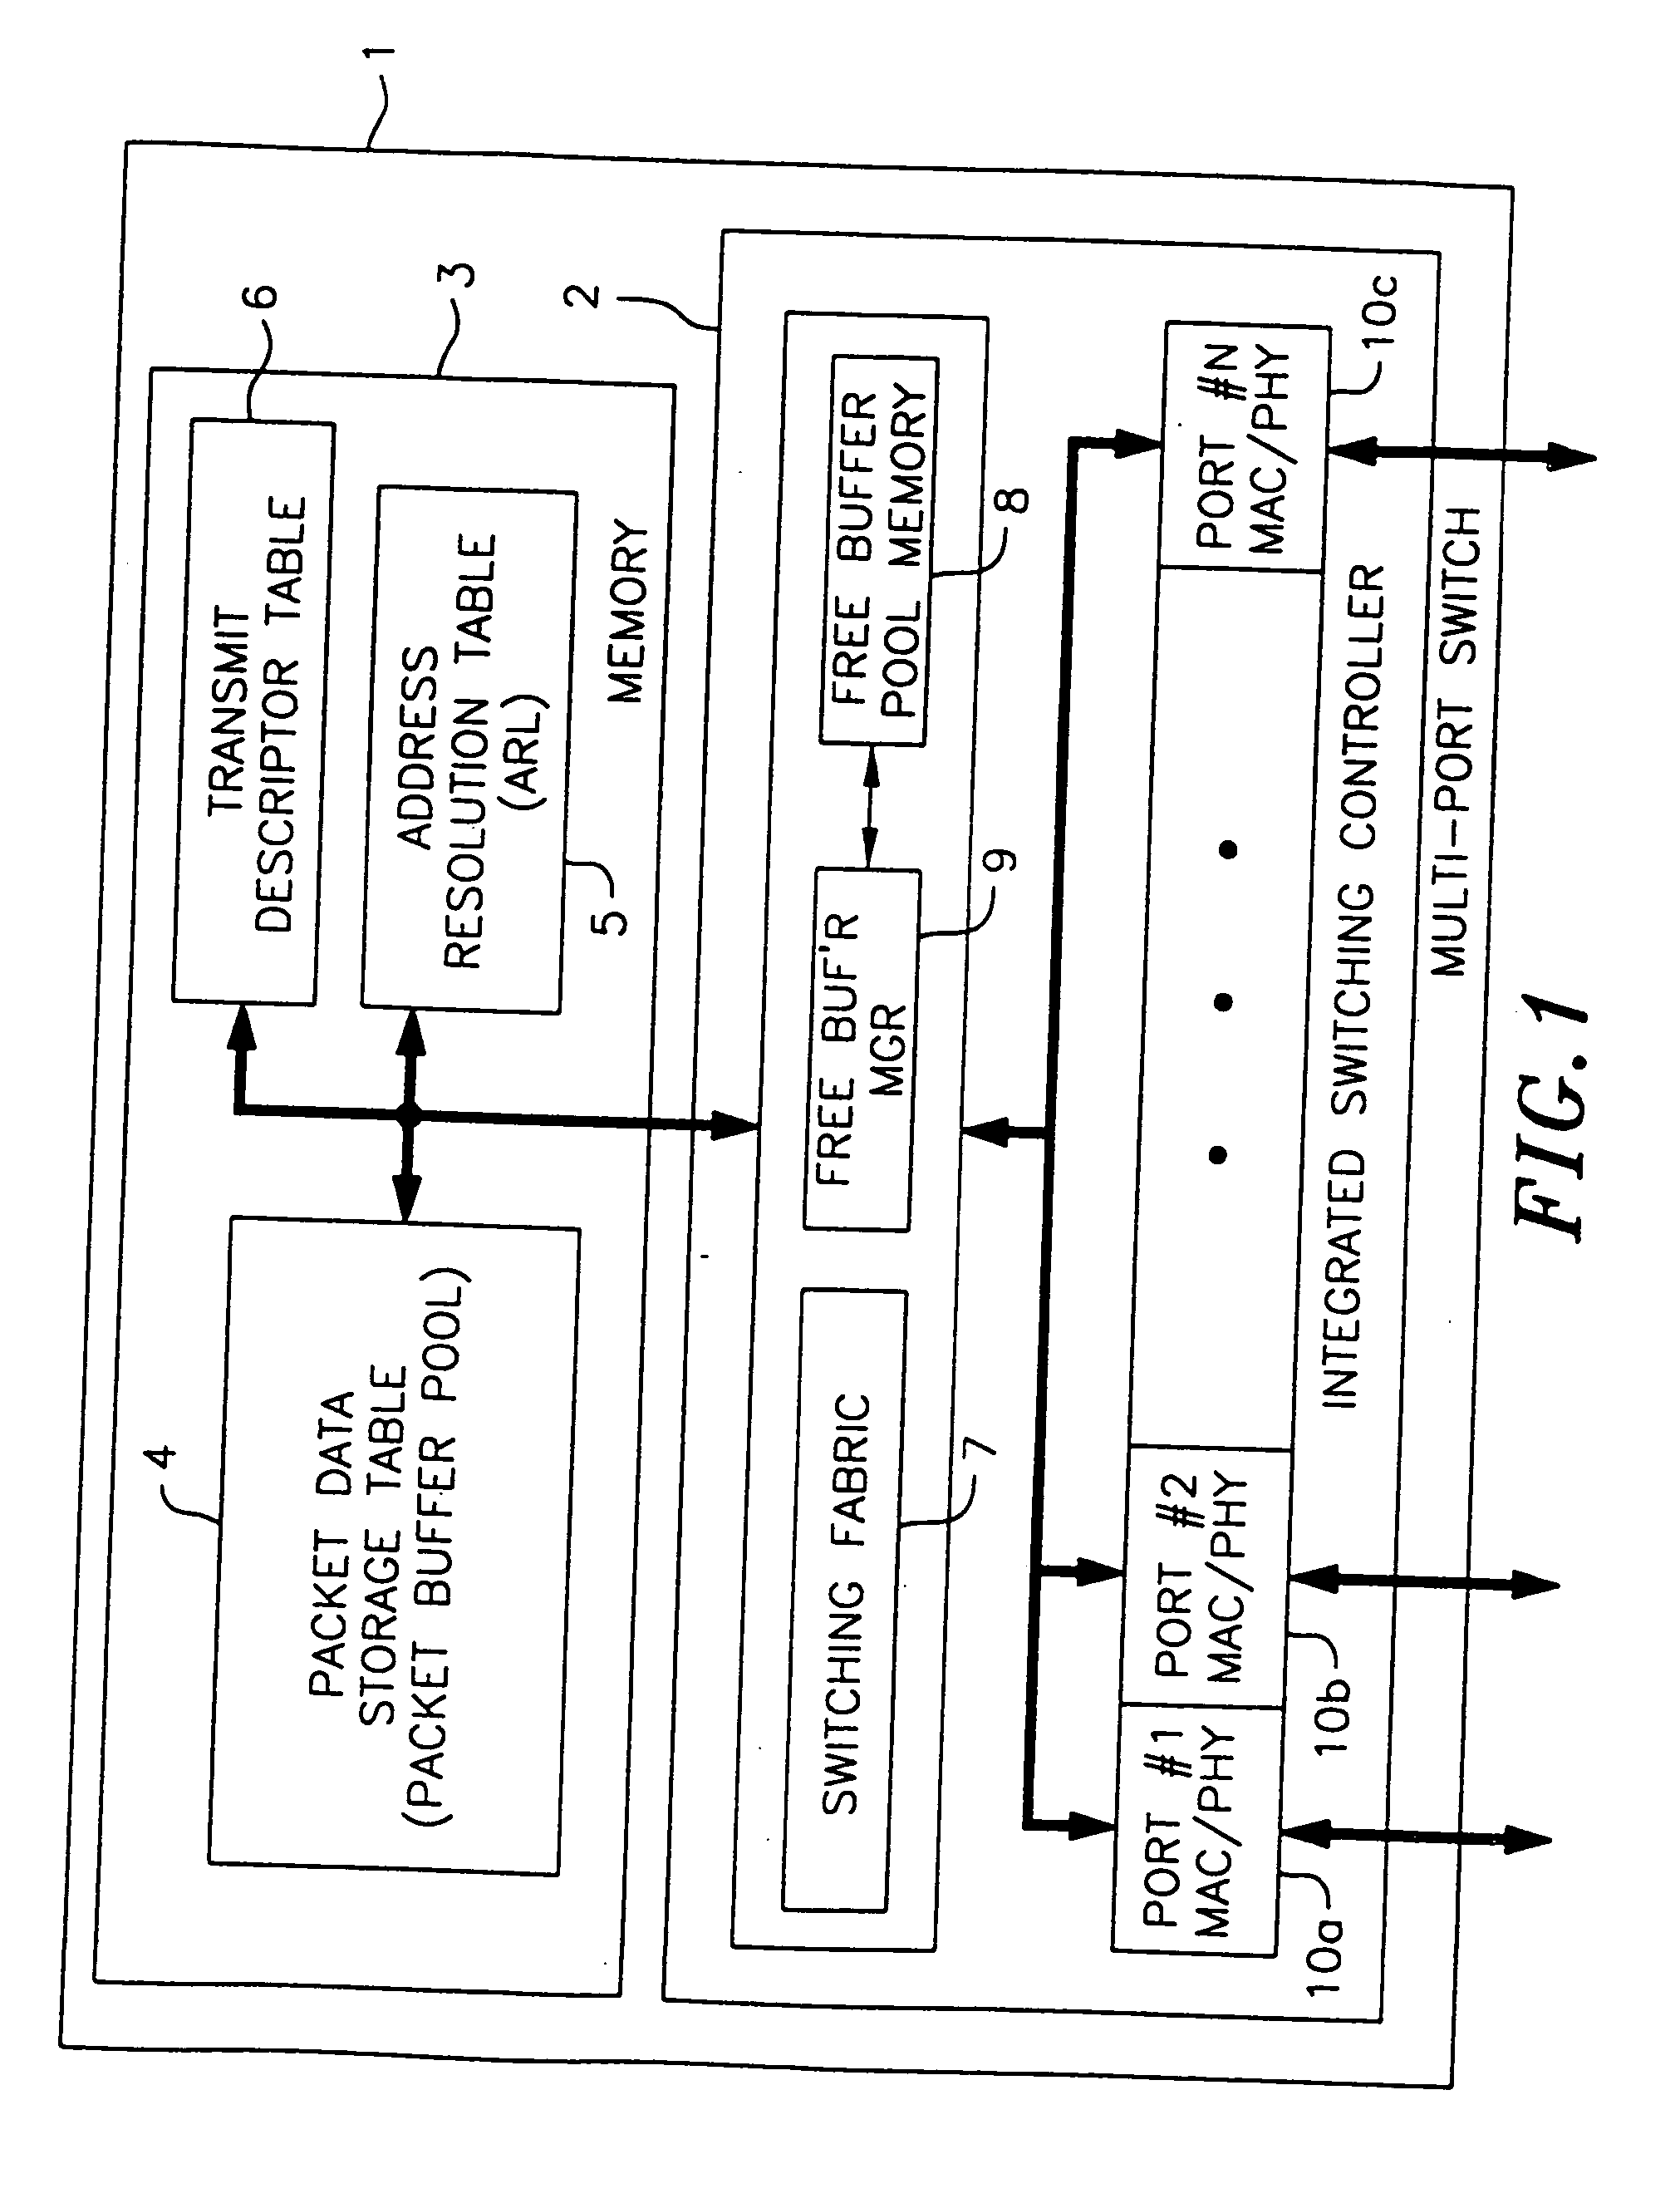 Apparatus for ethernet PHY/MAC communication